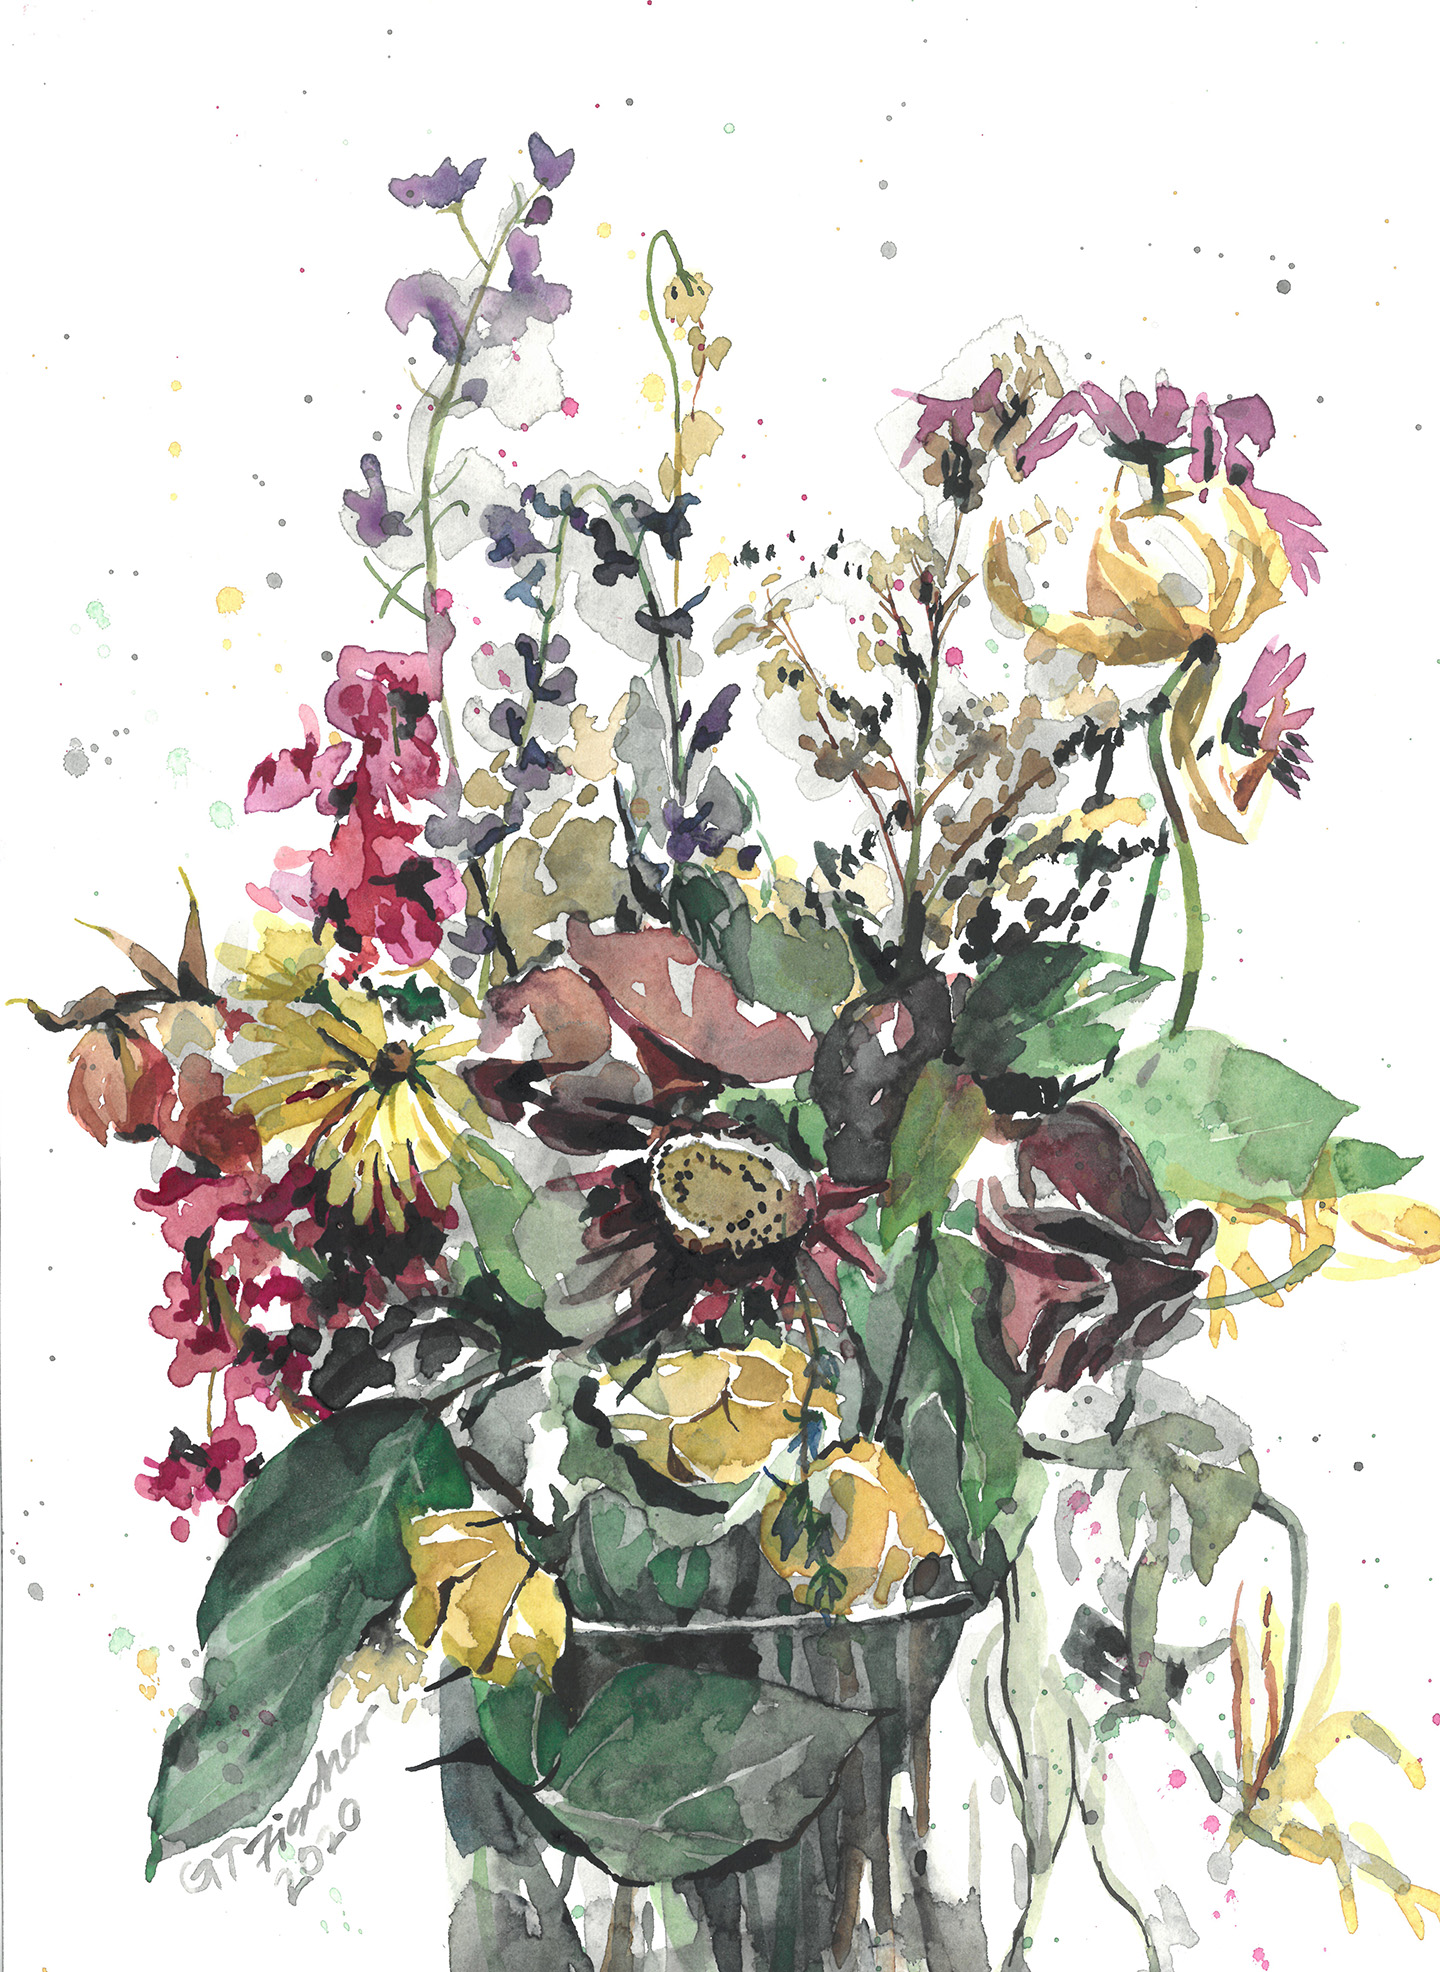 End of Mother's Day Flowers, Watercolor by Gloria Tseng Fischer, Art Exhibit at Brookside Gardens